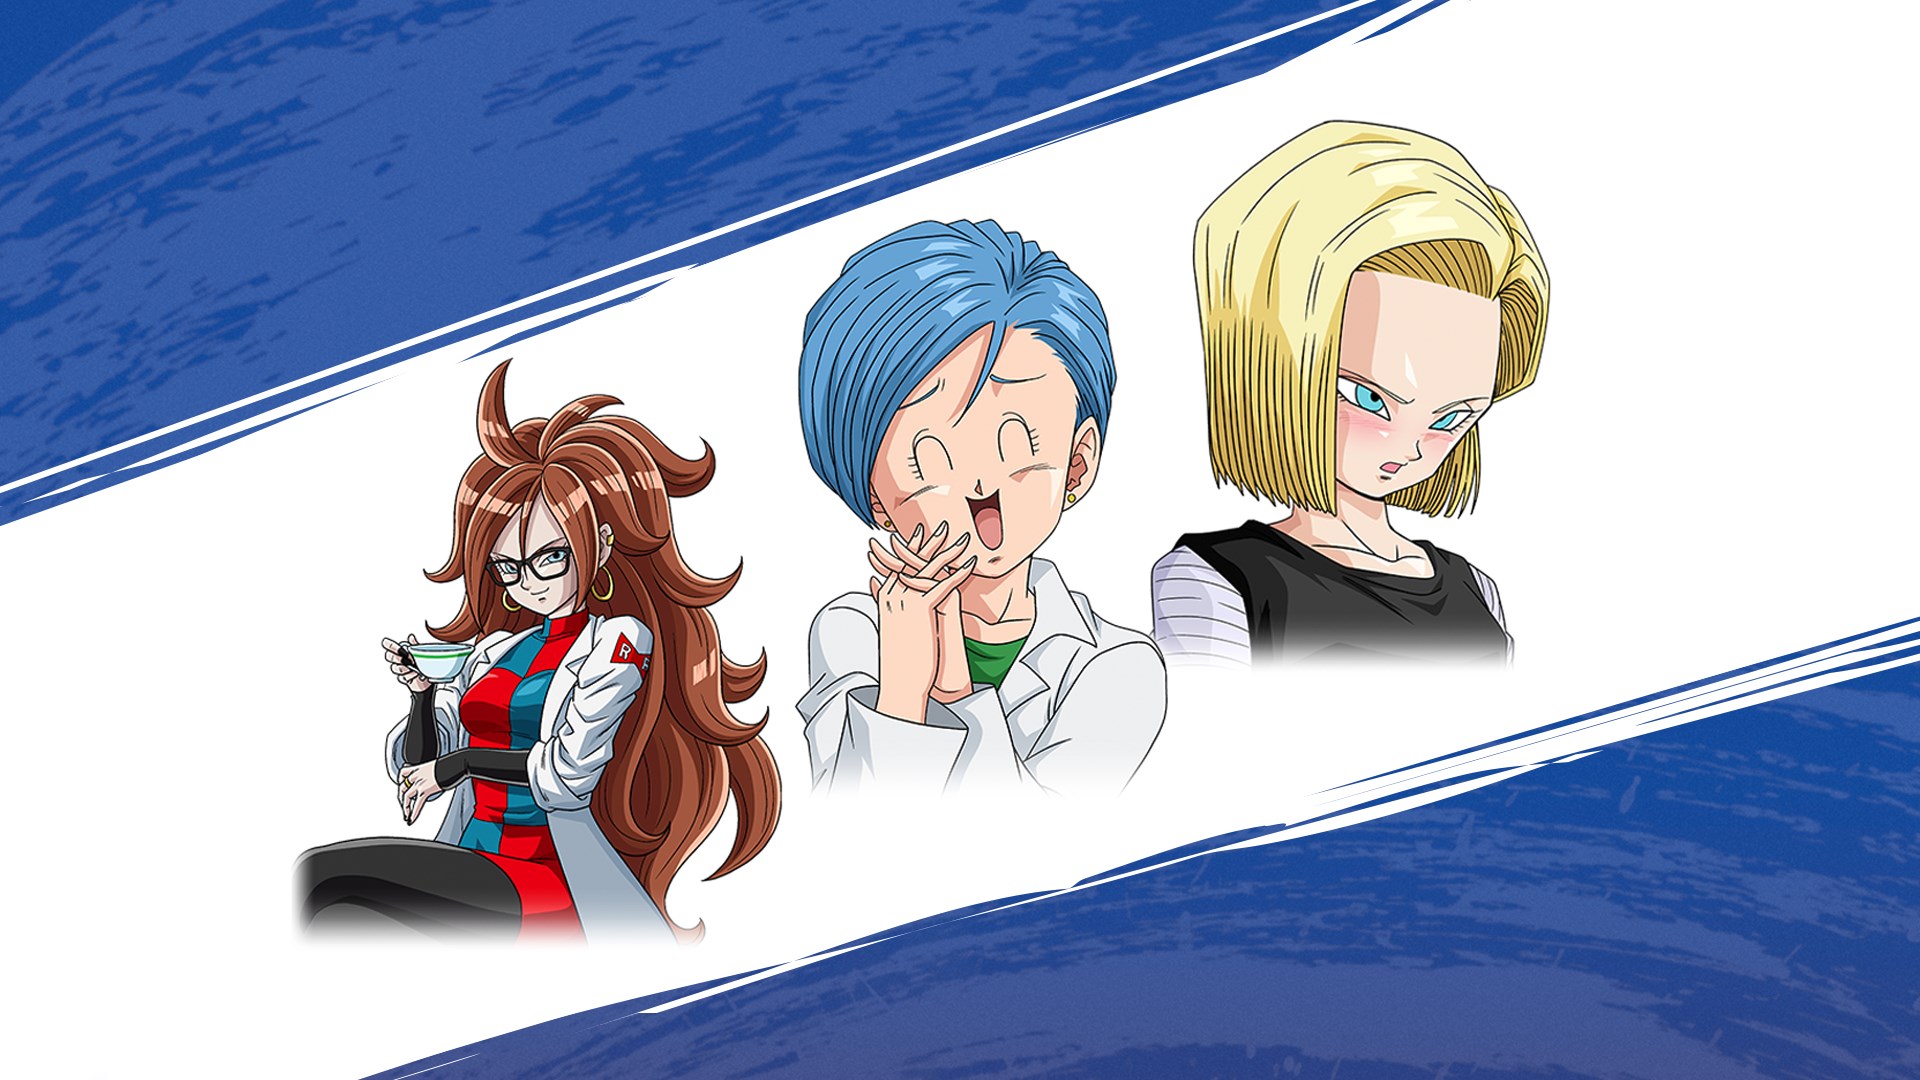 DRAGON BALL FIGHTERZ - Stamps: Girls Pack (Windows)